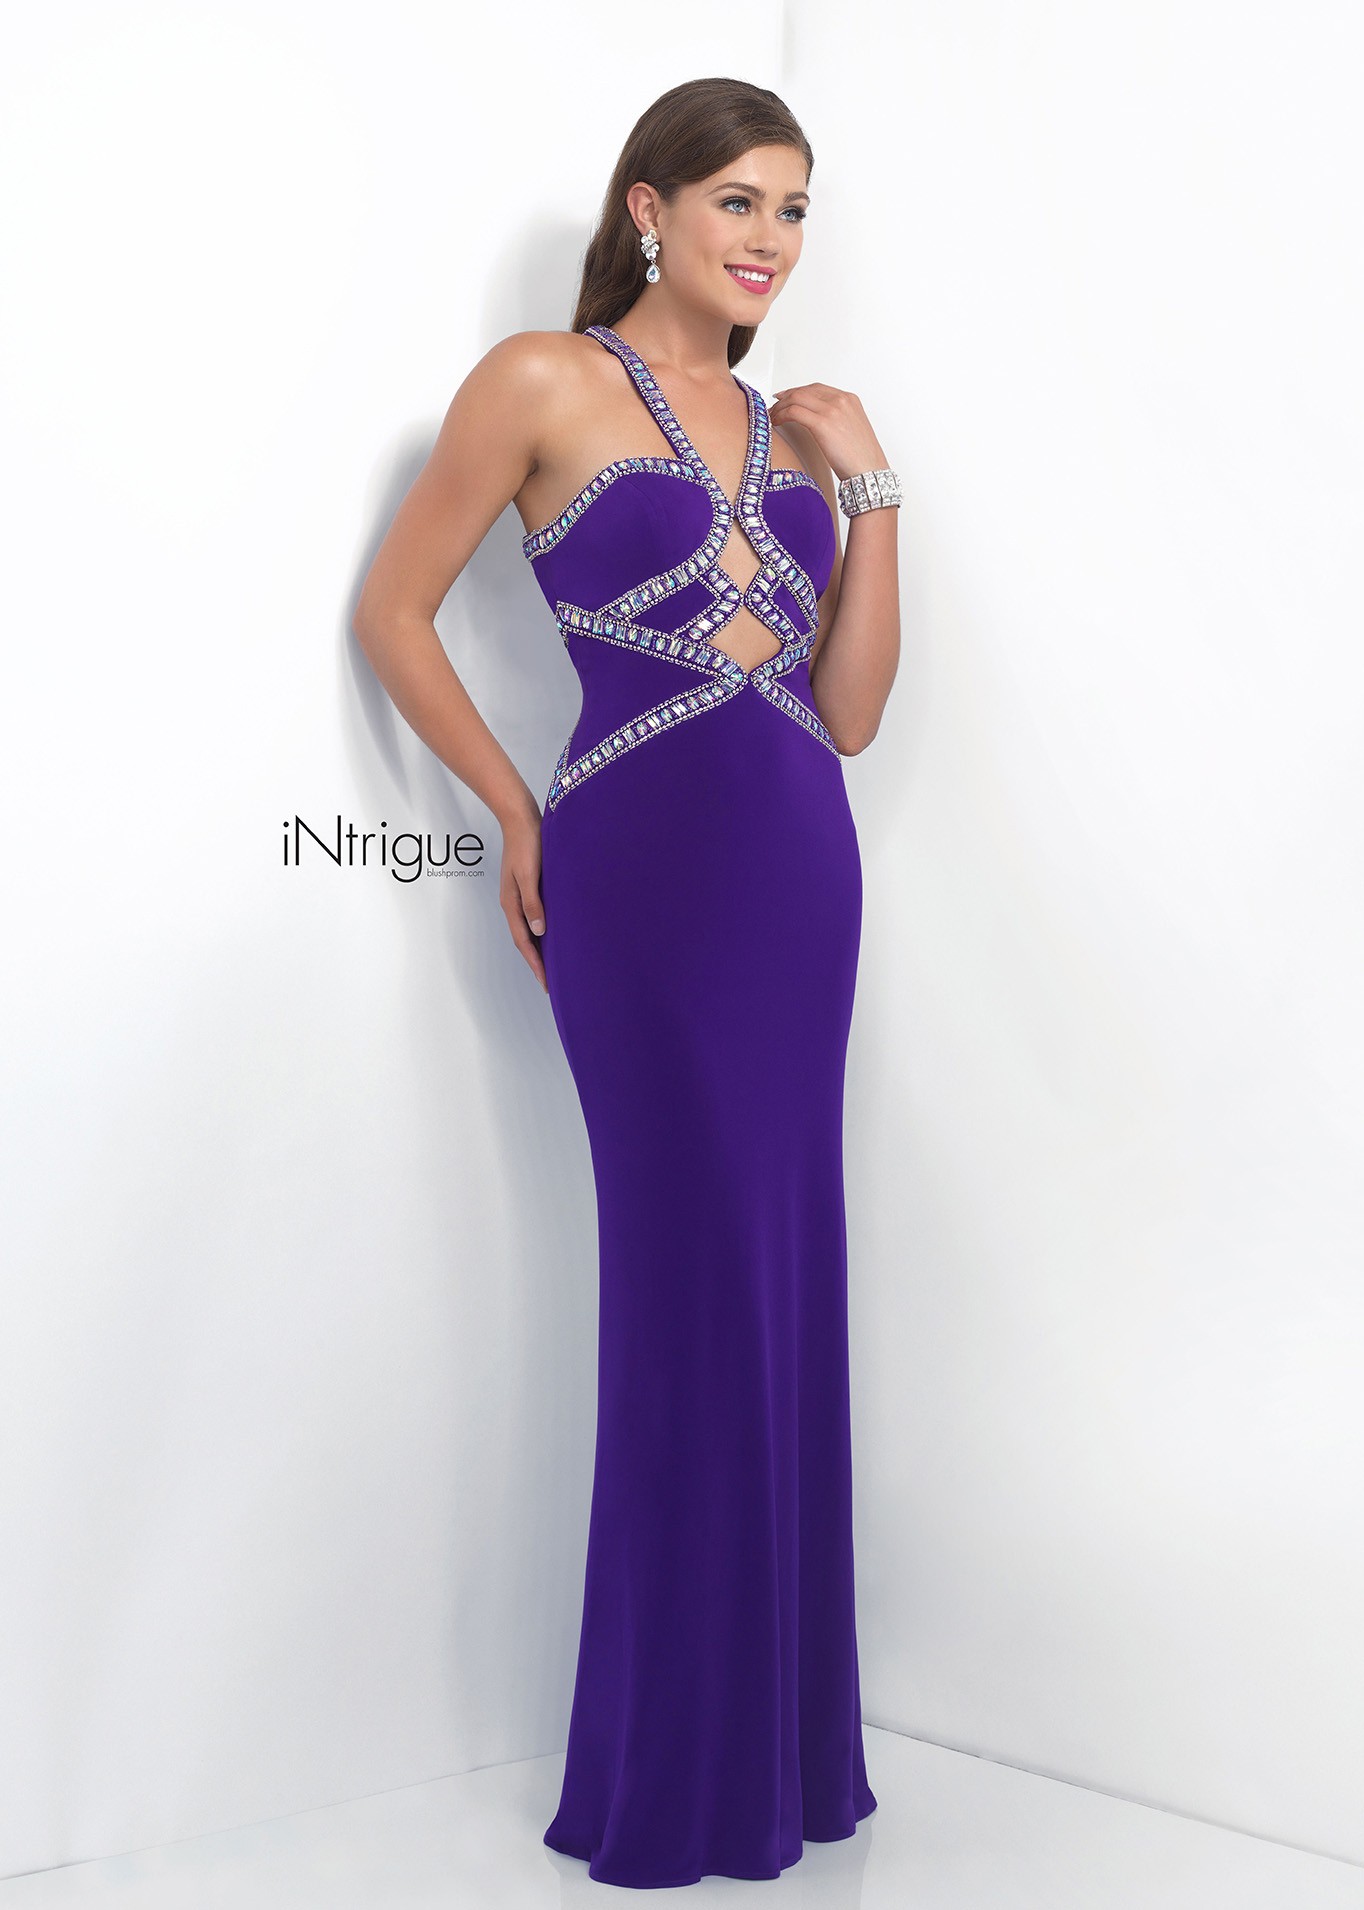 Intrigue 163 Jaw Dropping Jeweled Cut Out Jersey Dress 